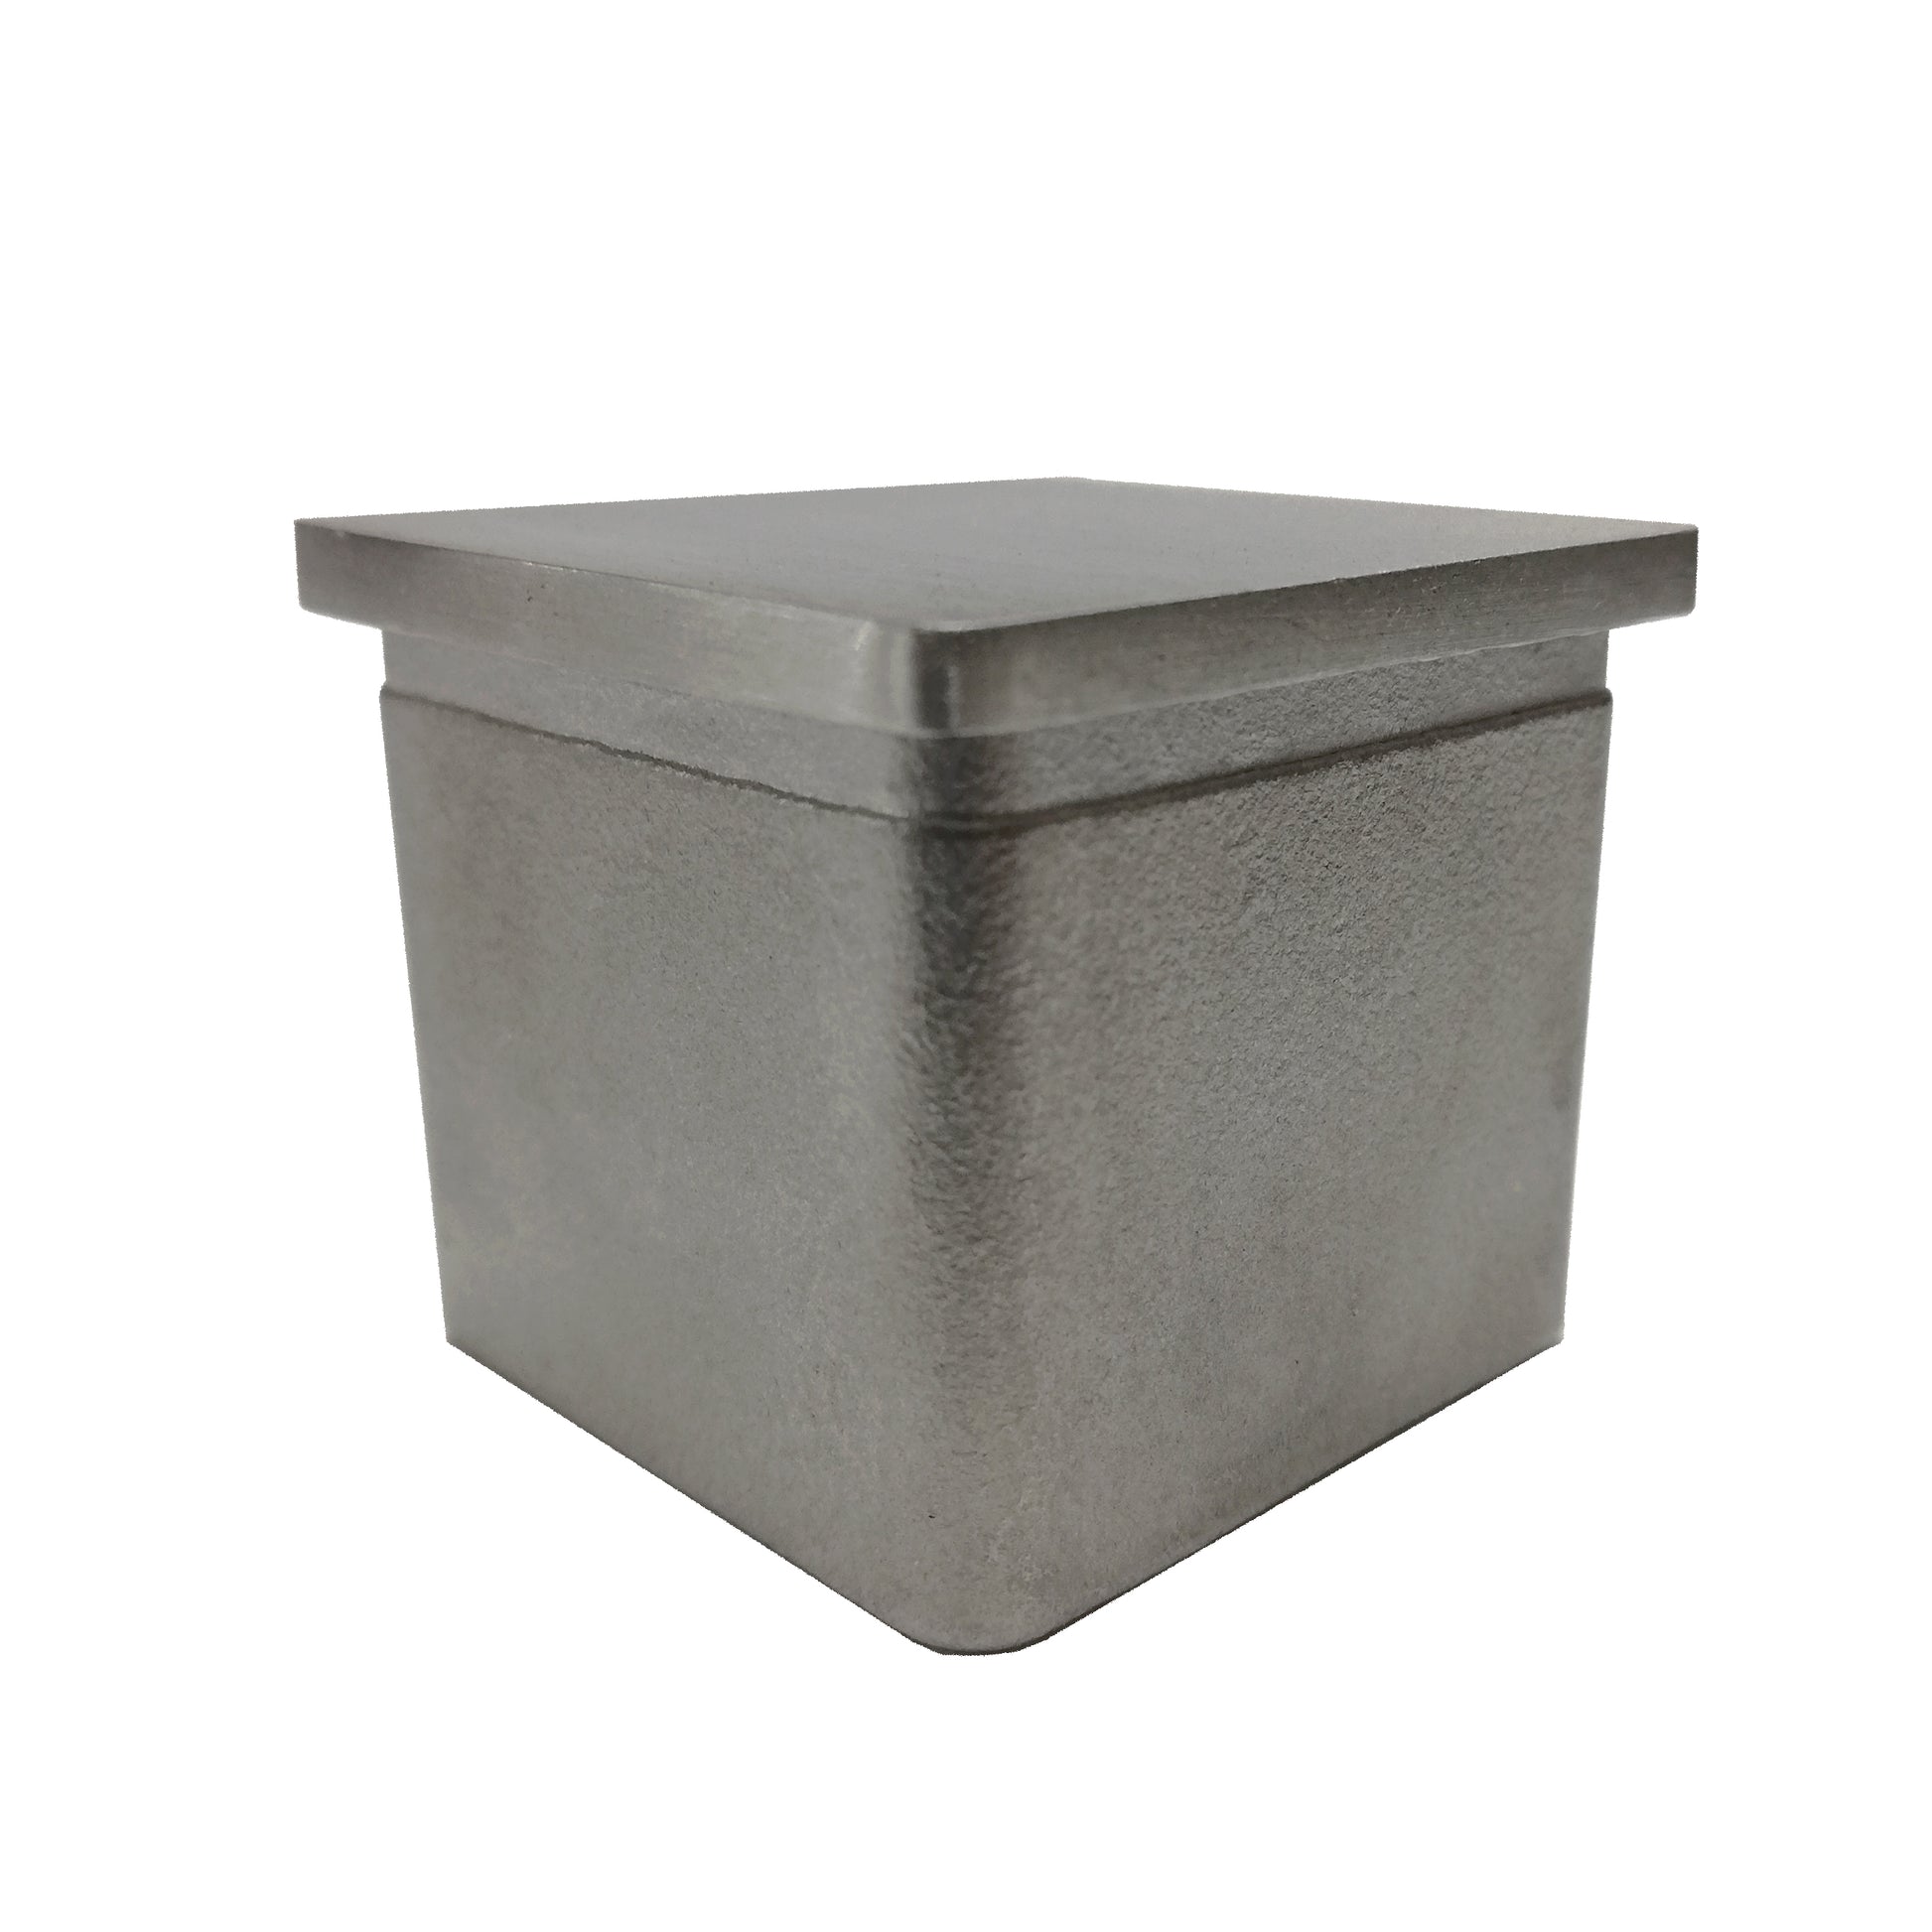 Post Square End Cap Stainless Steel 316 1-1/2" Post Fitting (G1140-150-150) - SHEMONICO